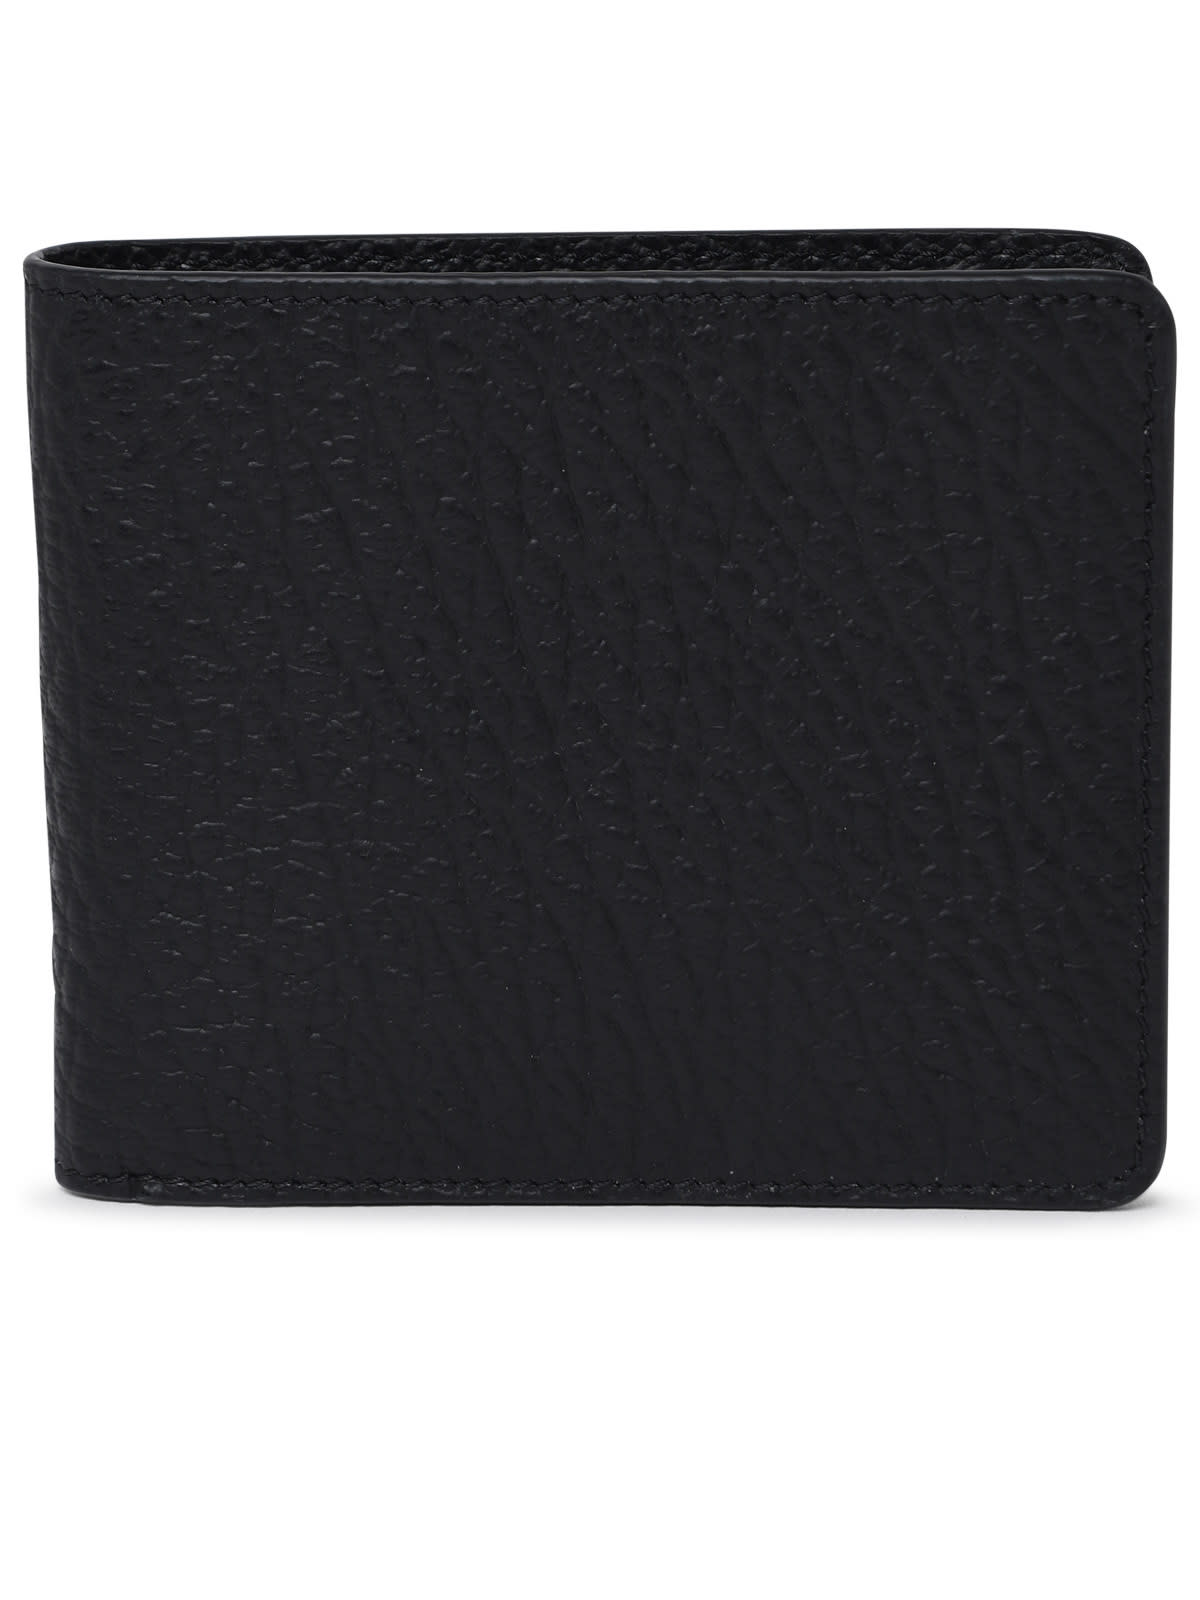 Four Stitches Black Embossed Leather Wallet